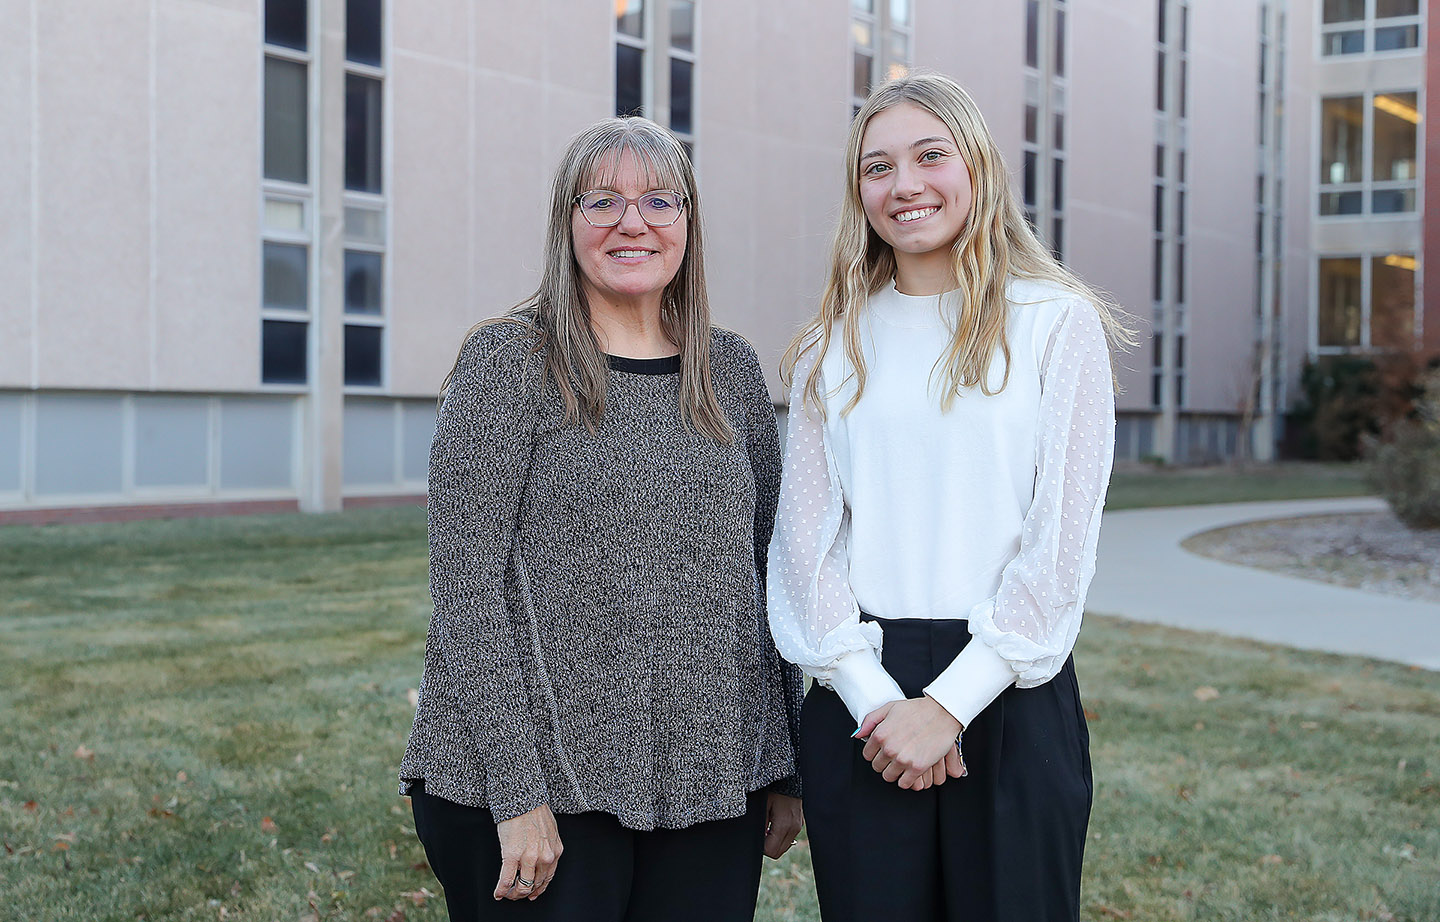 UNK freshman Ella Buhlke, right, calls biology professor Kim Carlson “one of my biggest role models.” “As a woman in STEM, it’s important to see other women in STEM who are strong, independent and successful in their careers. It’s really nice to work with her and observe her in that way,” she said.